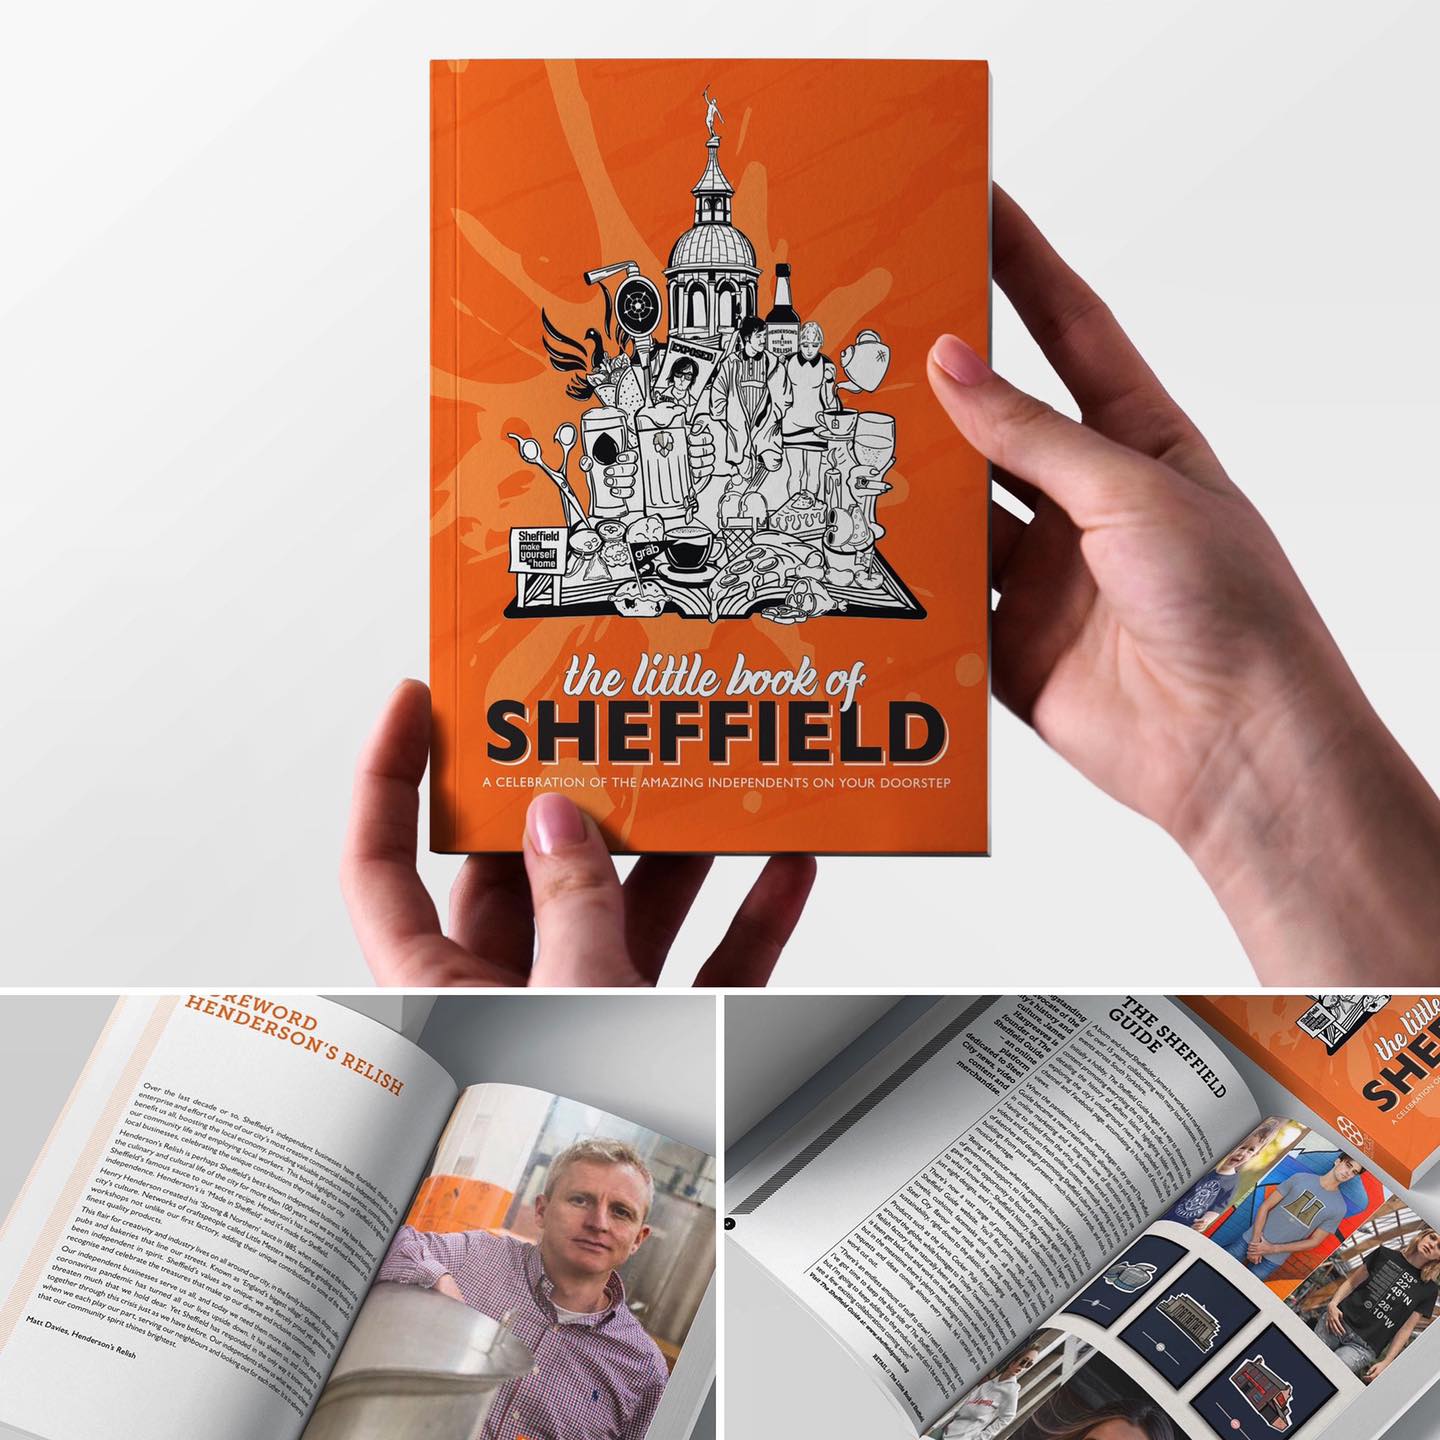 The Little Book of Sheffield